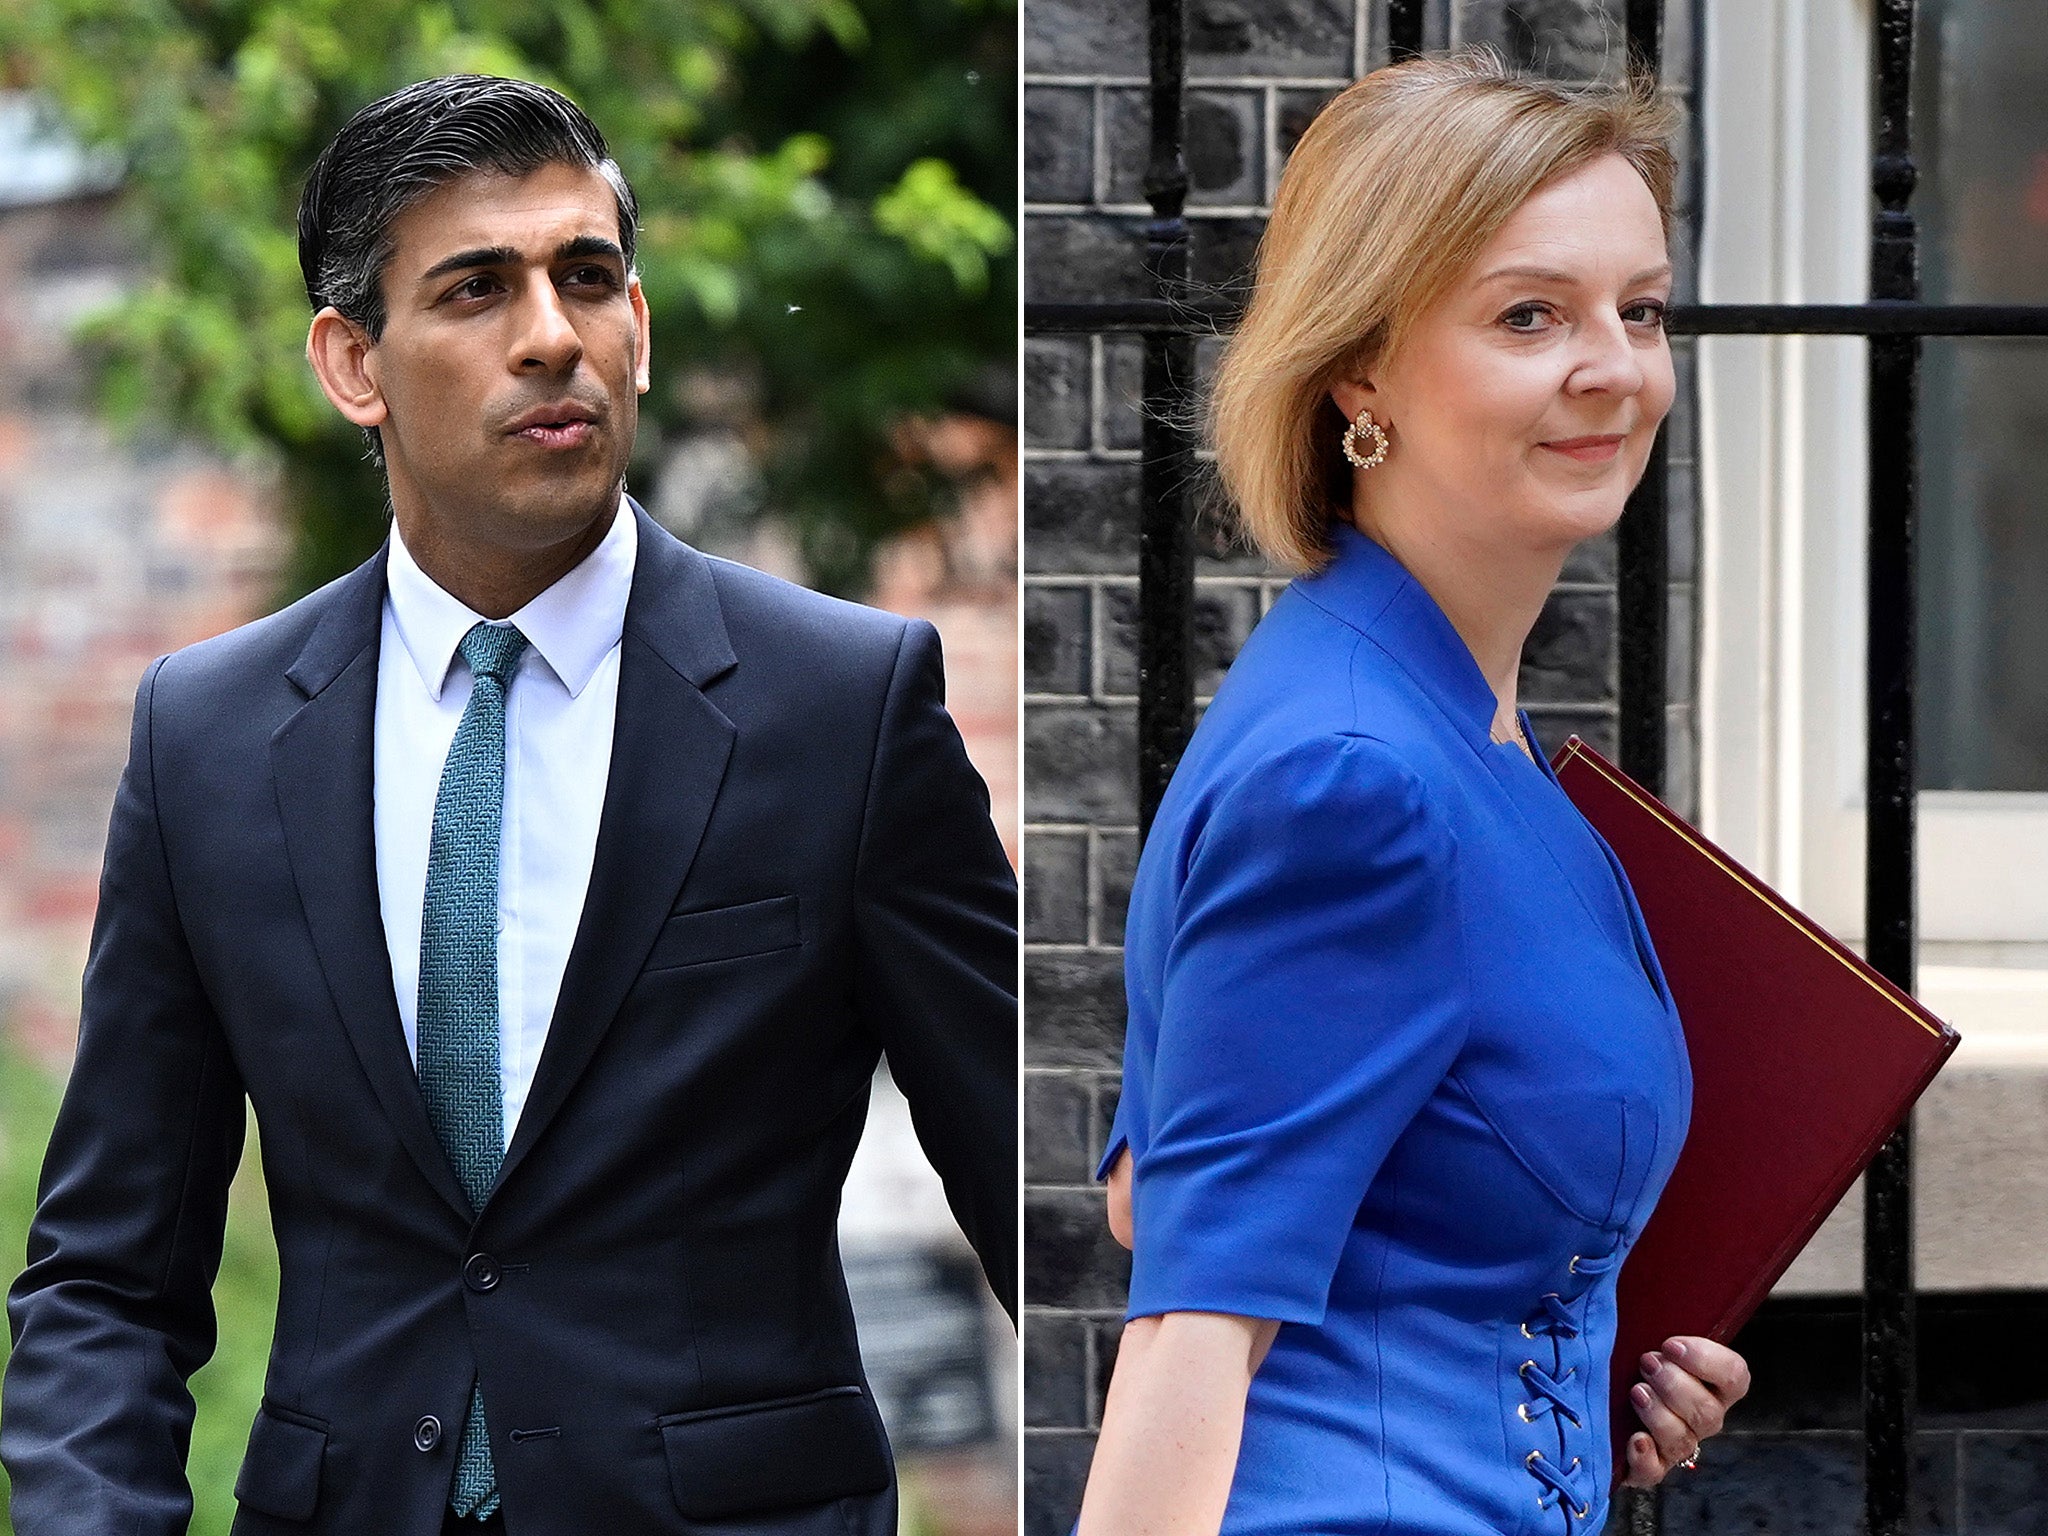 Tory leadership contenders Rishi Sunak and Liz Truss have promised tax cuts